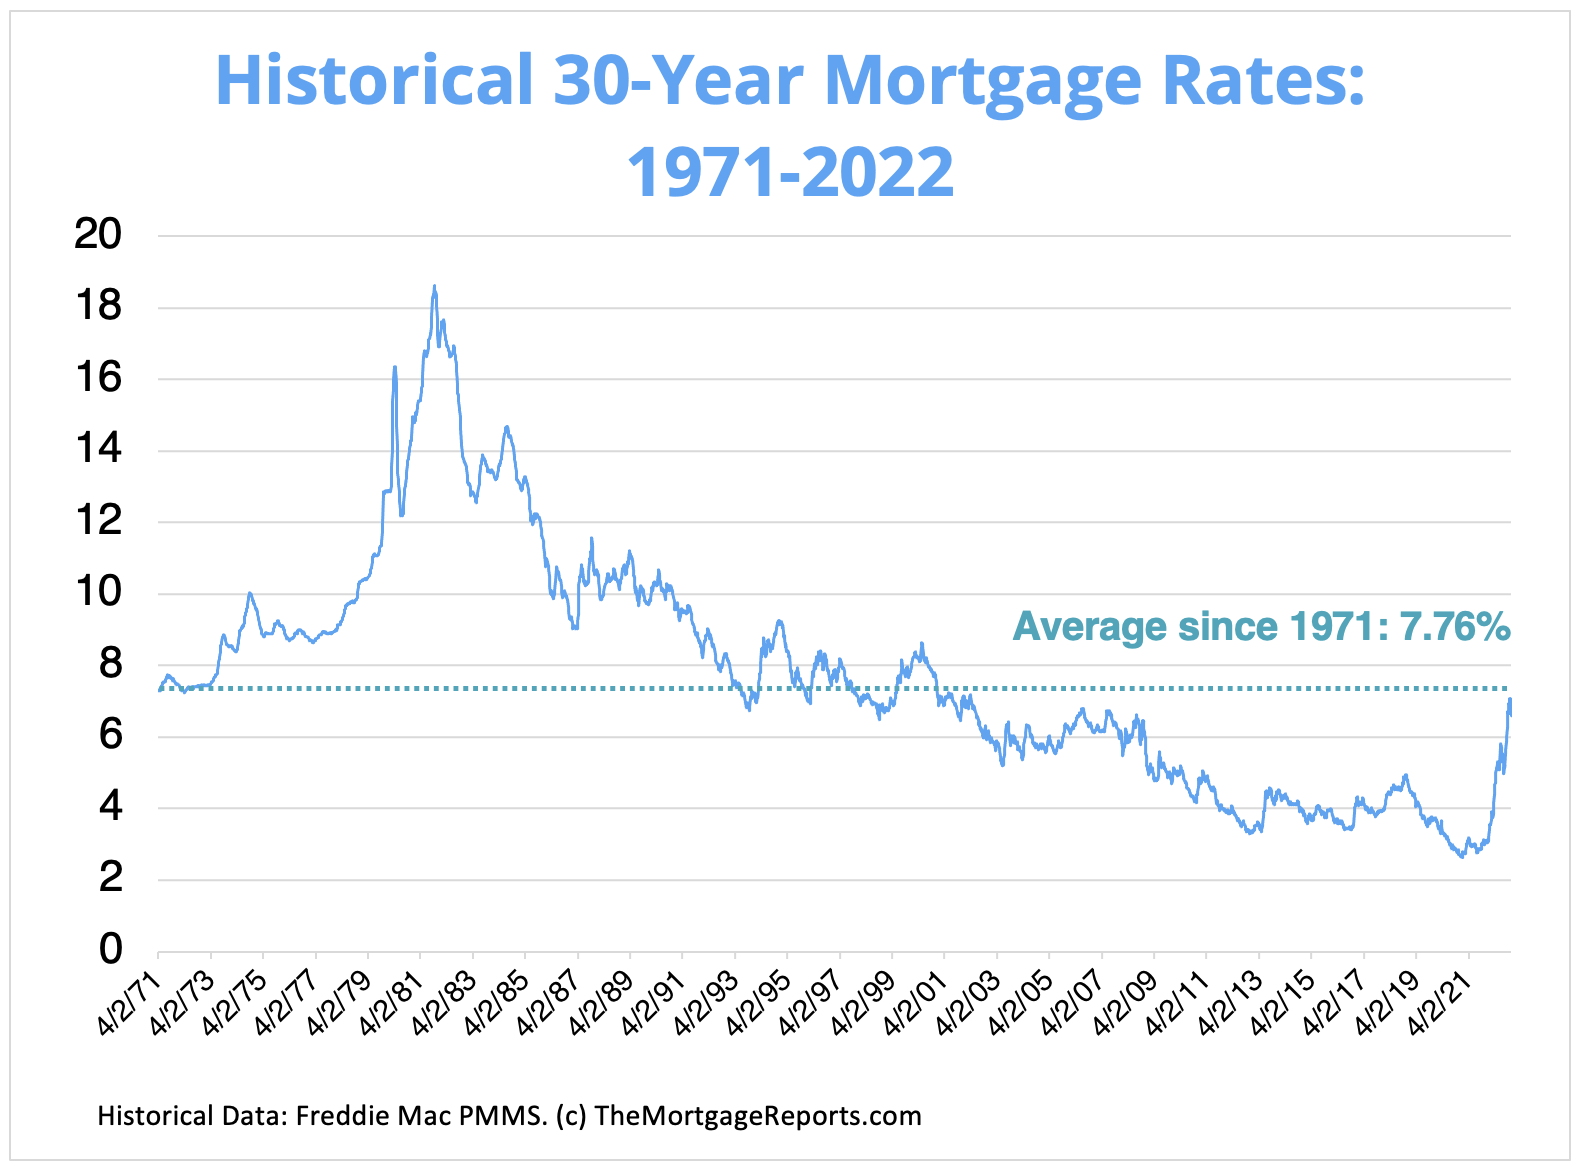 Historical 30-year mortgage rates chart showing 30-year rates from 1971 to November 18, 2022